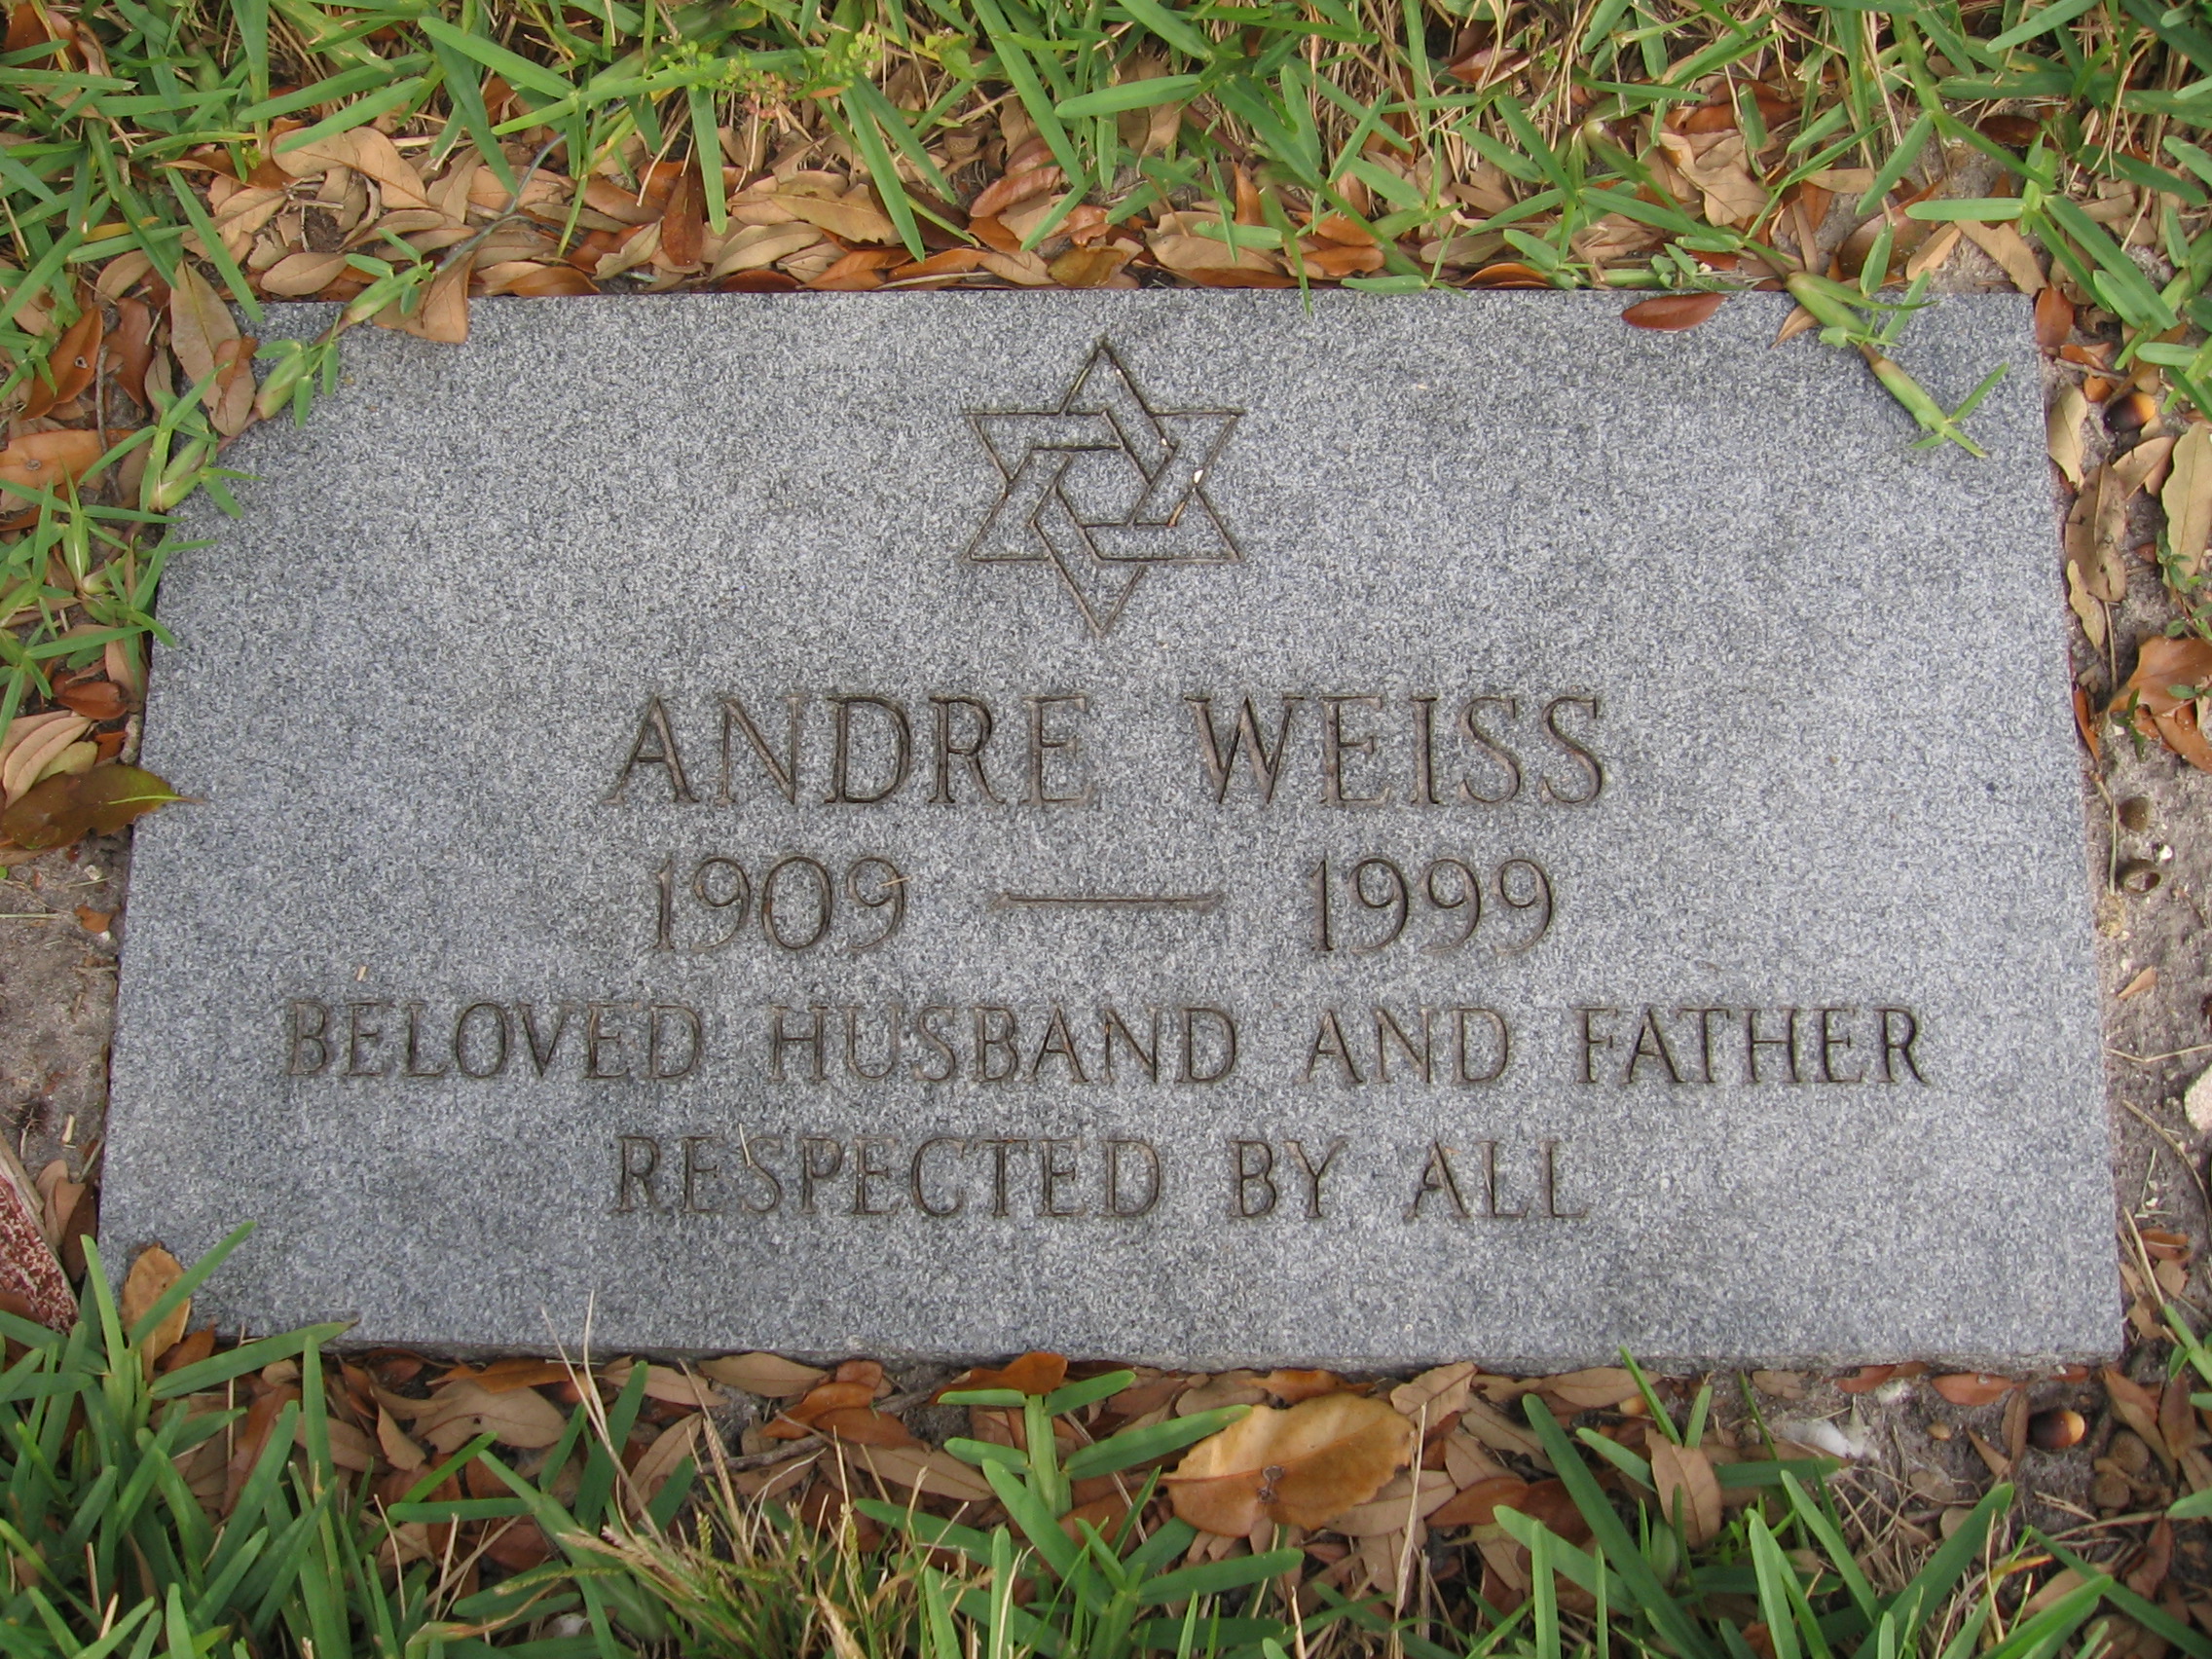 Andre Weiss